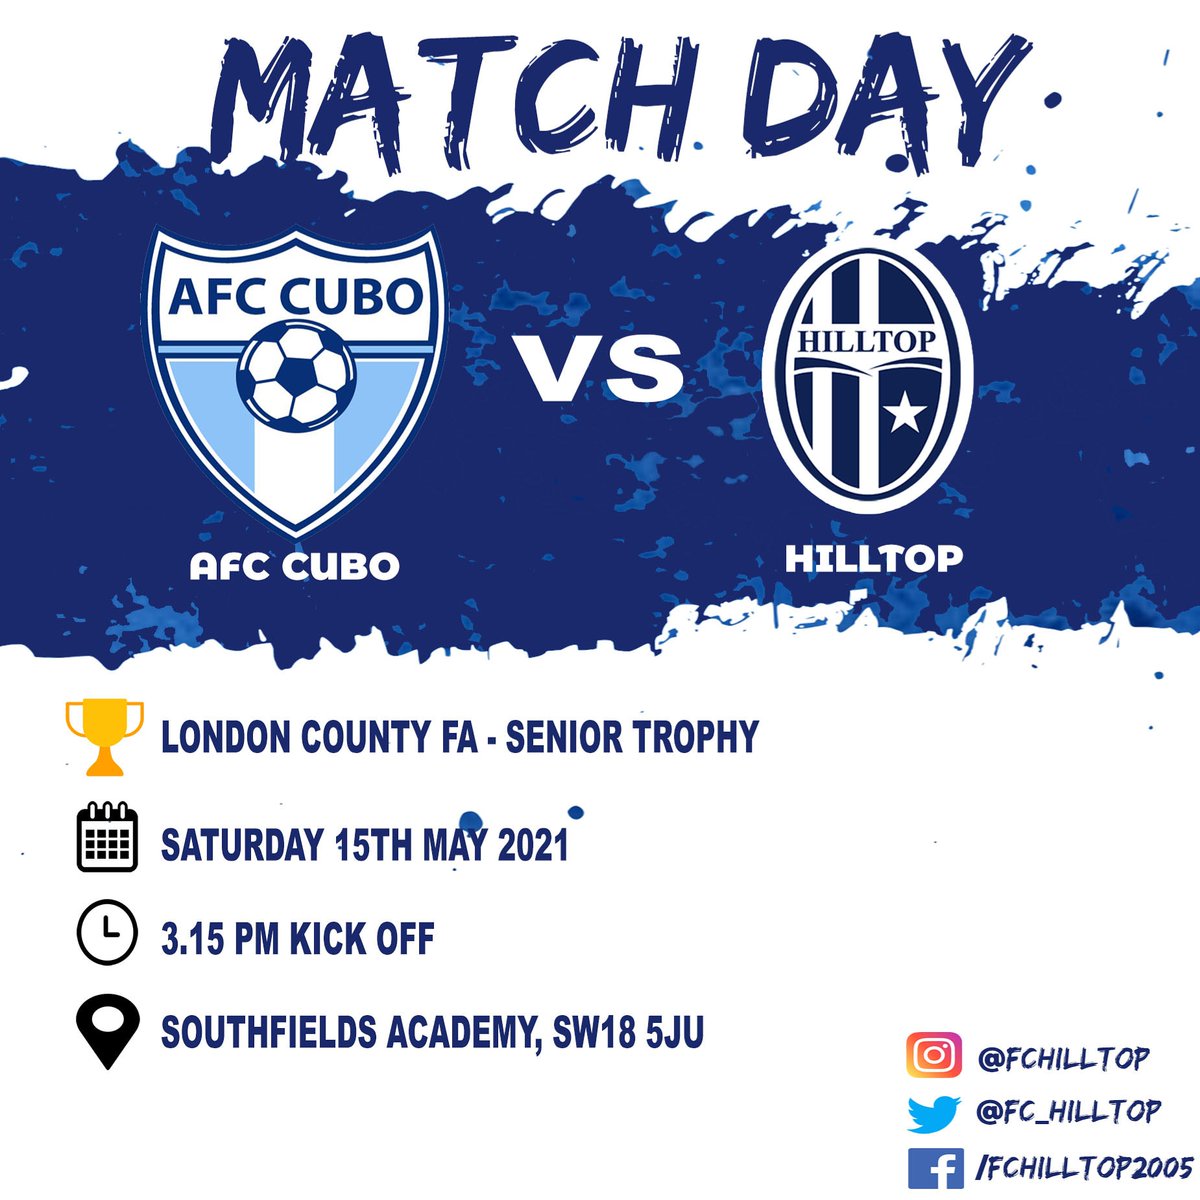 Cup Game tomorrow vs @AFCCubo in the quarter finals of the London Senior Trophy.

#hilltopway #grassrootsfootball #football #premierdivision #cupgame #londoncountyfa #seniortrophy #middlesexleague